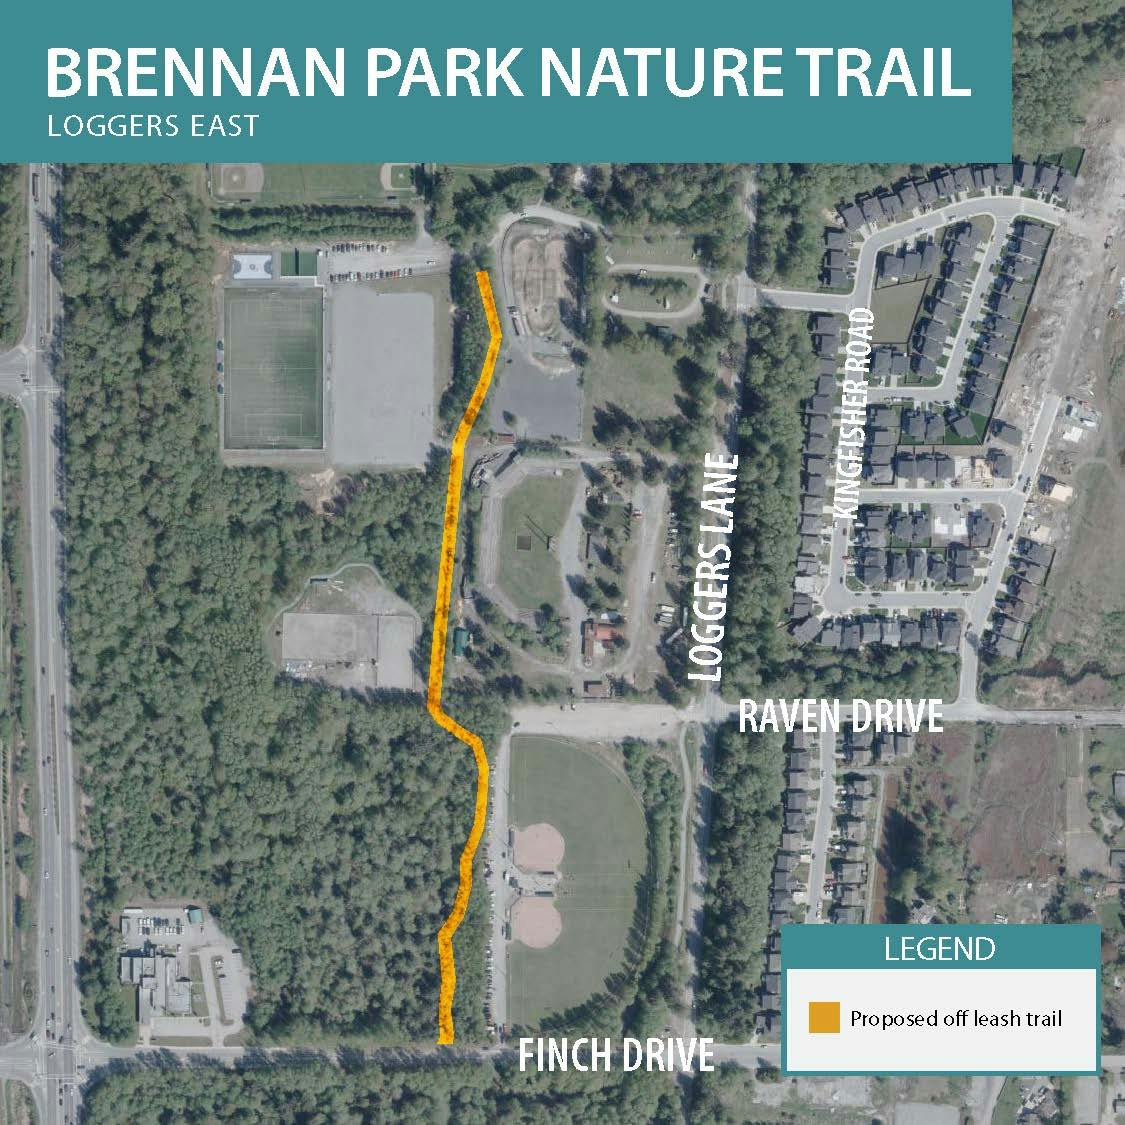 Map of Brennan Park Nature Trail